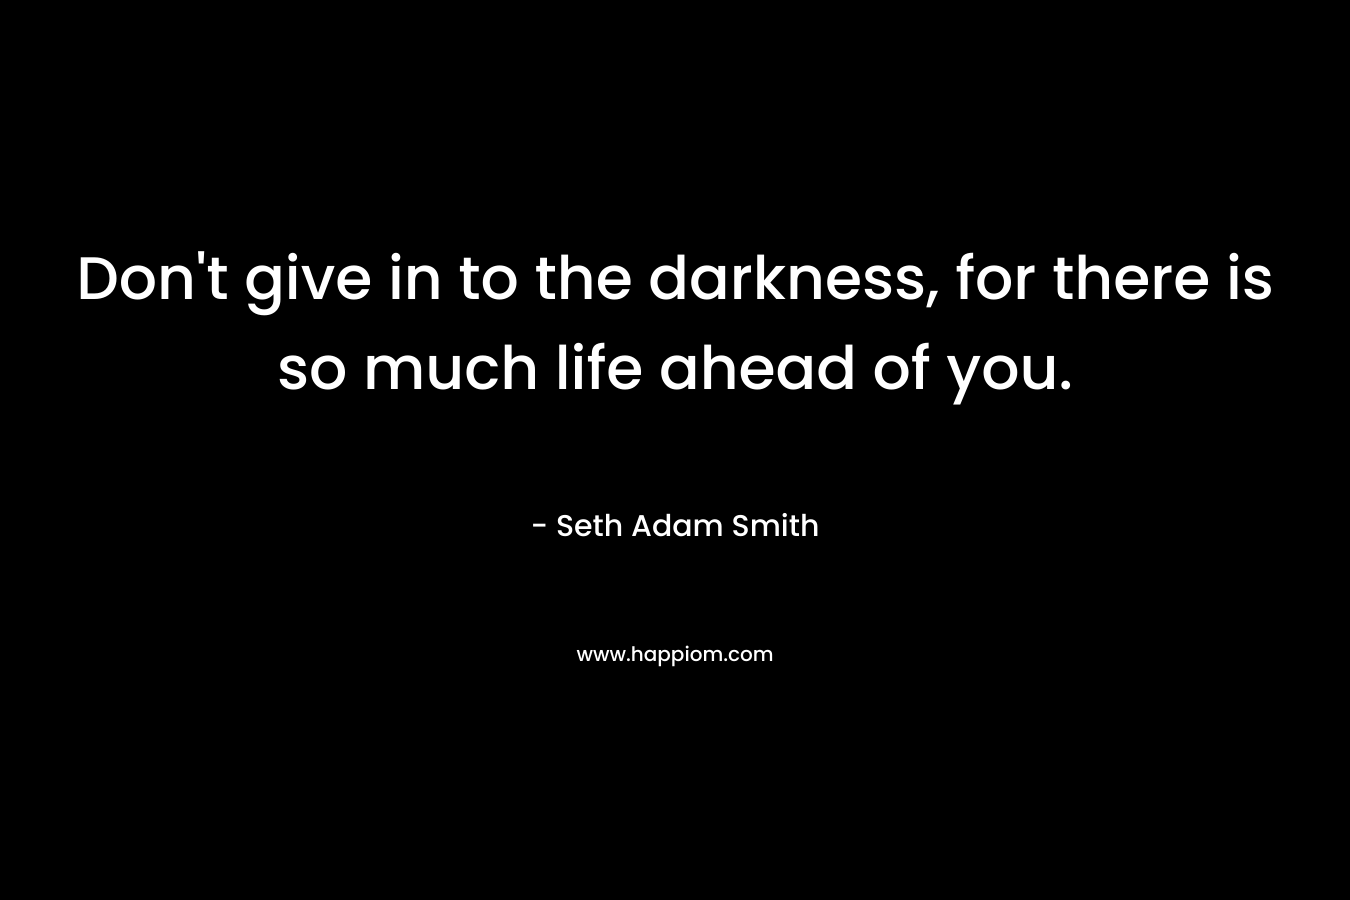 Don't give in to the darkness, for there is so much life ahead of you.